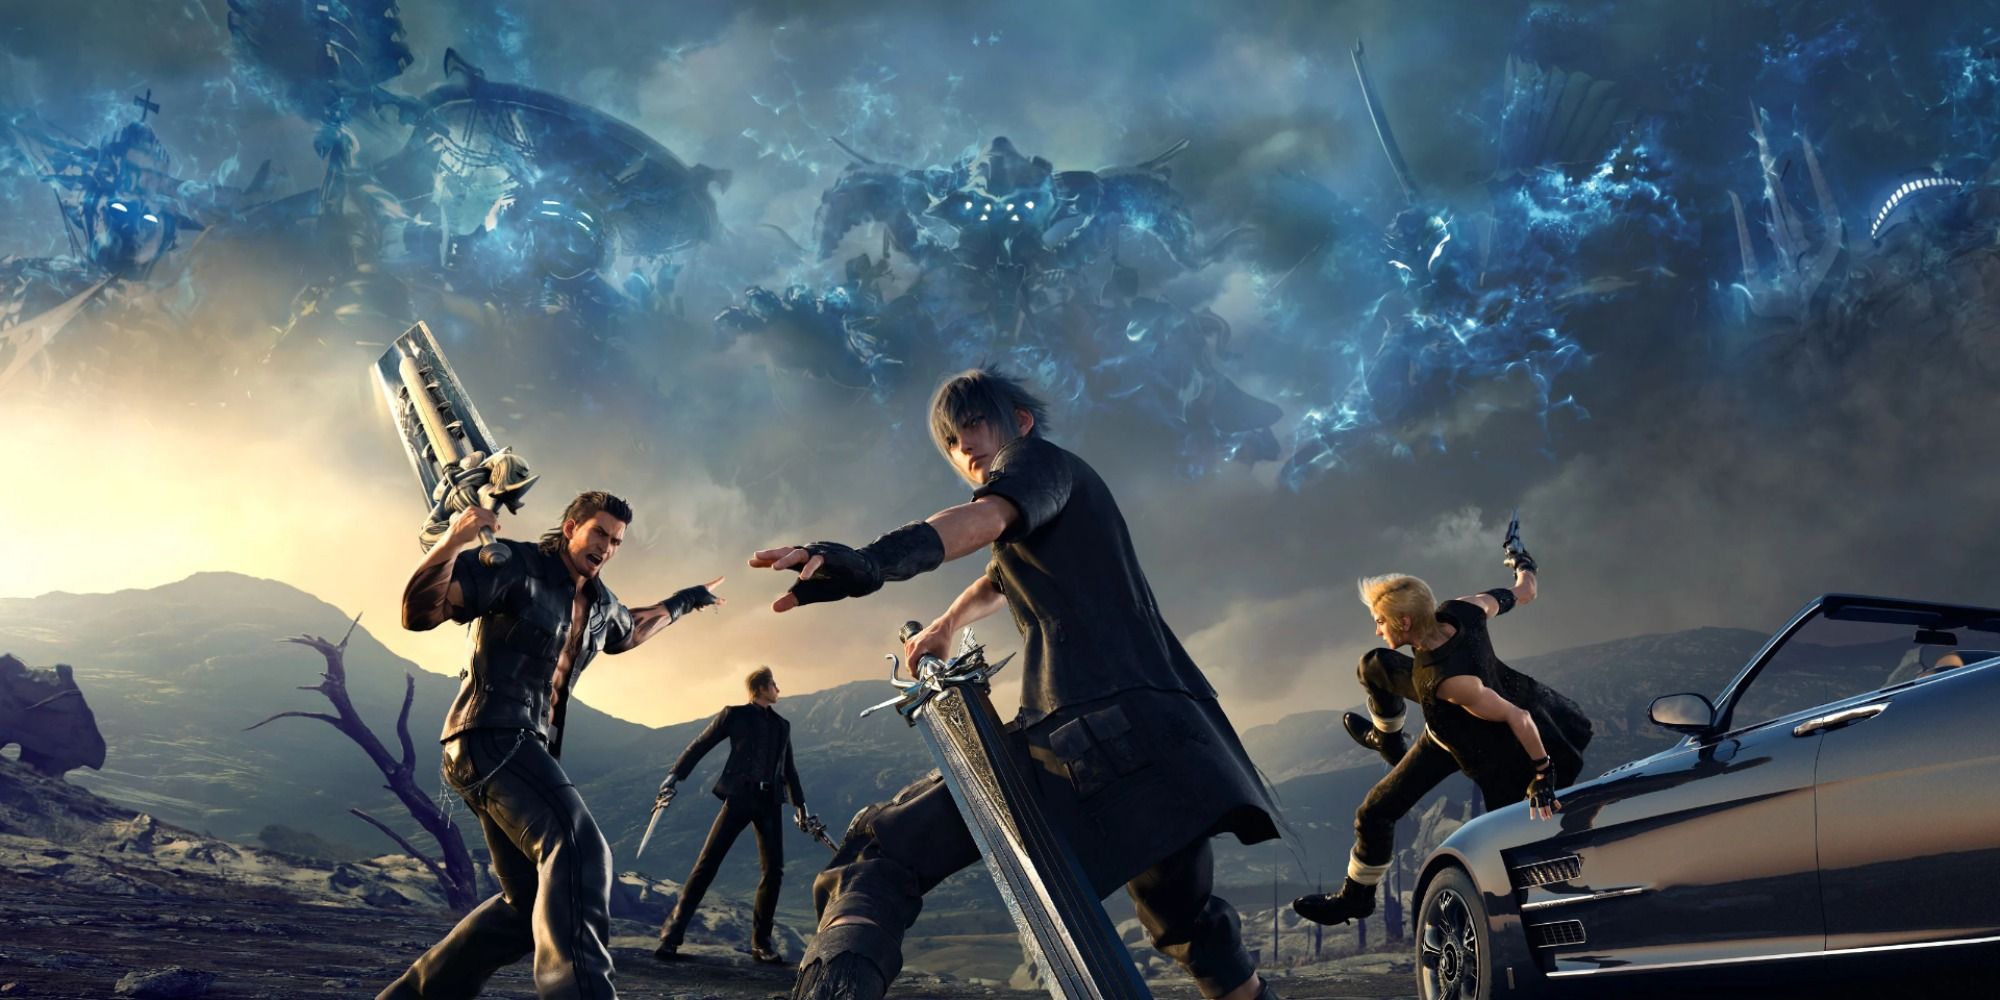 There's a new Final Fantasy 15 mobile game, and it's bad - Polygon